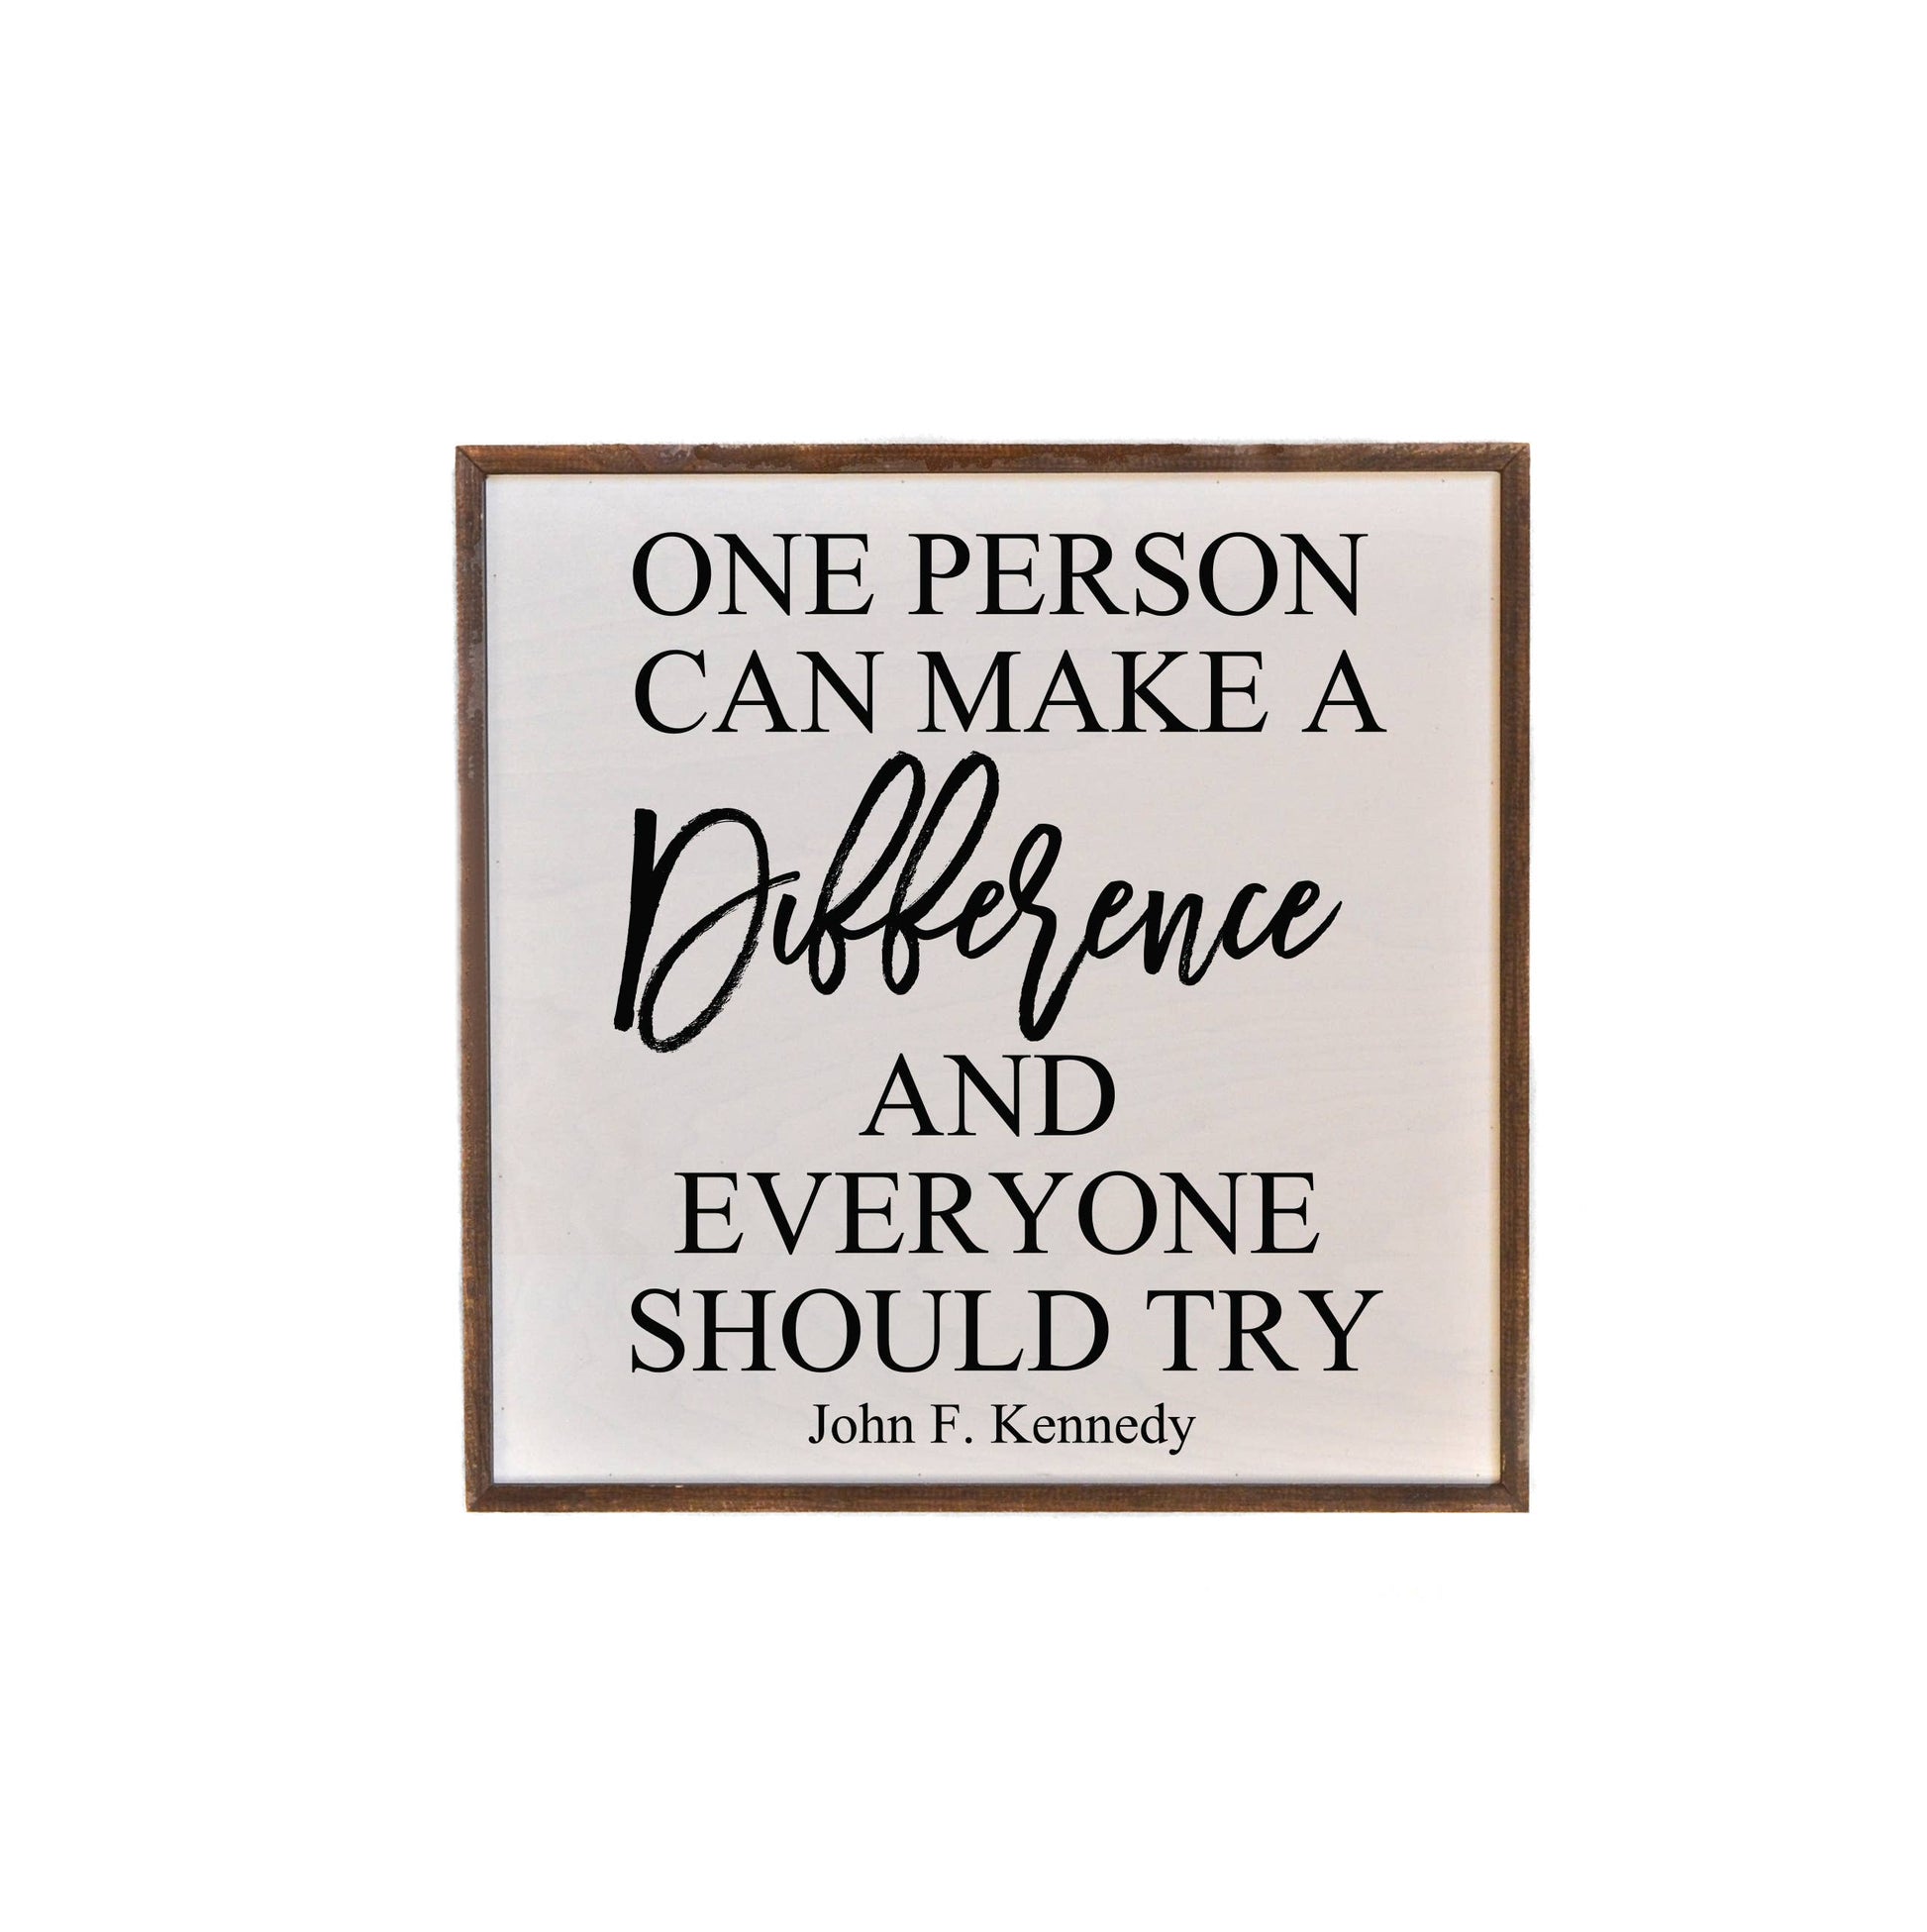 One Person Can Make A Difference Box 16x16 Wooden Sign - Hidden Gems Novelty